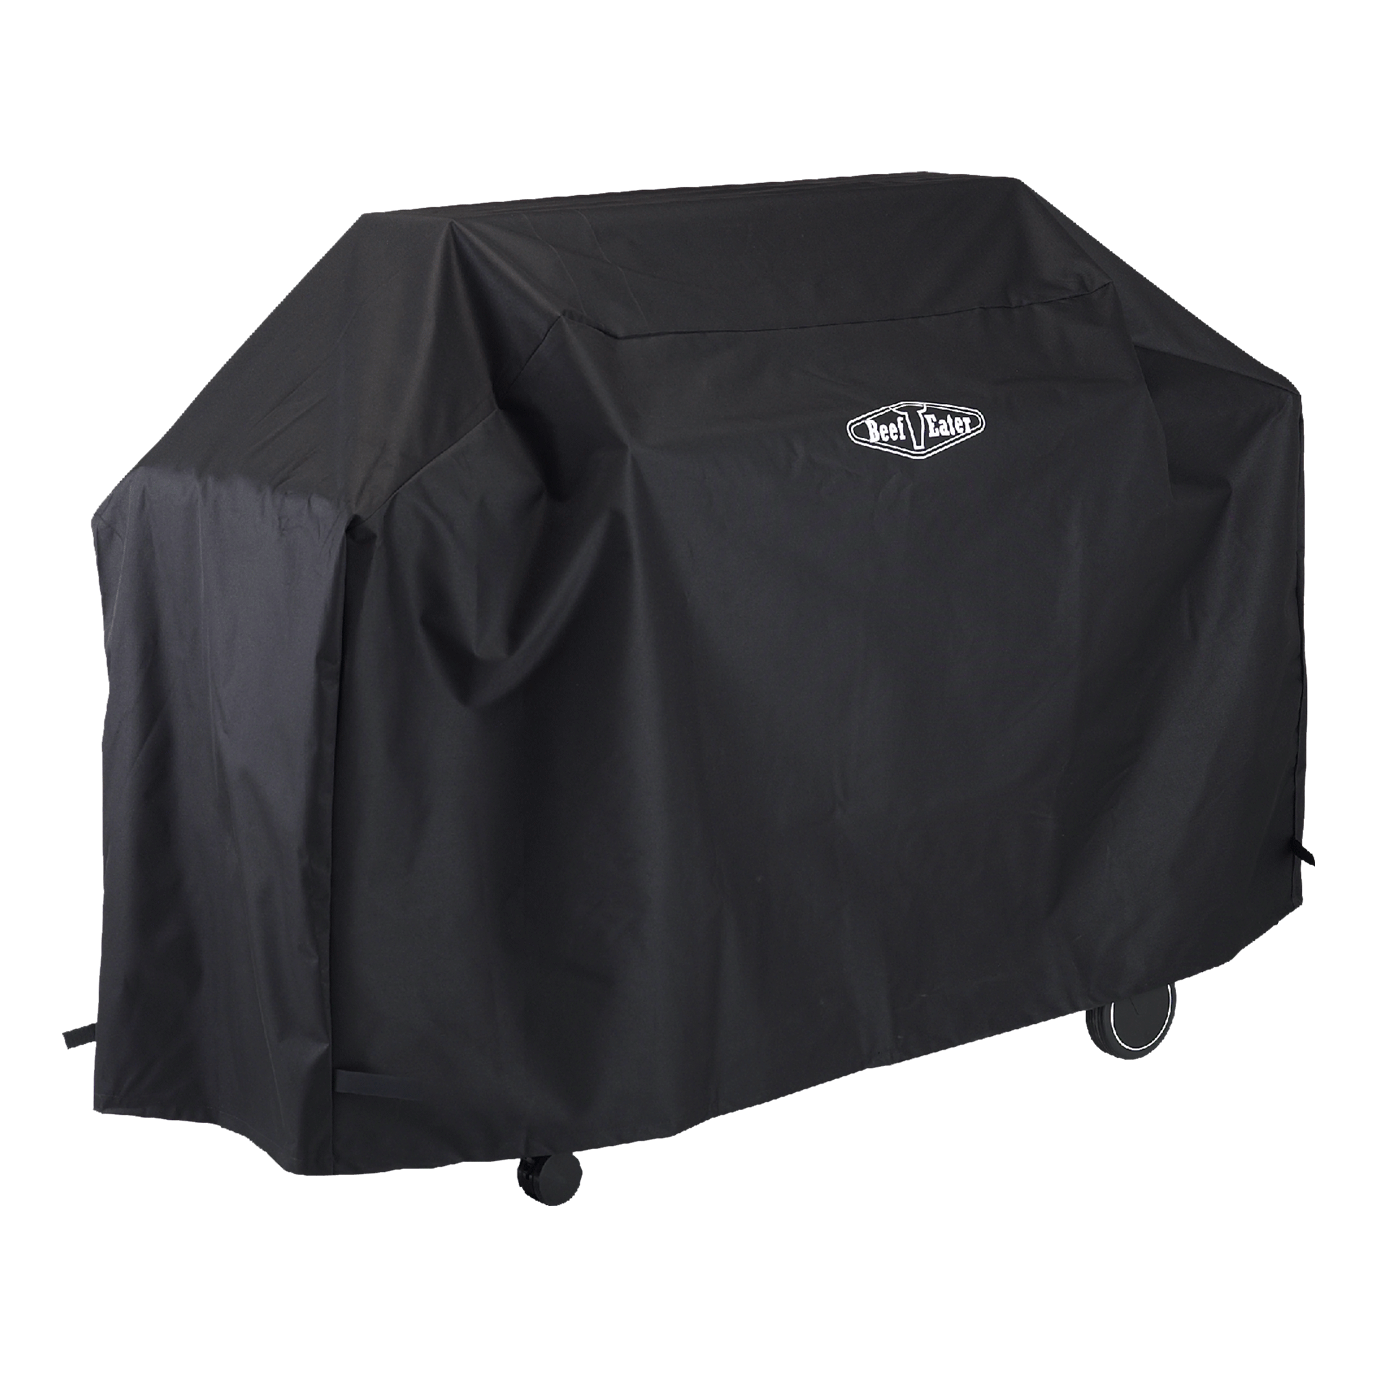 Beefeater All Weather BBQ Cover - 1500 / 1600 series 4 burner